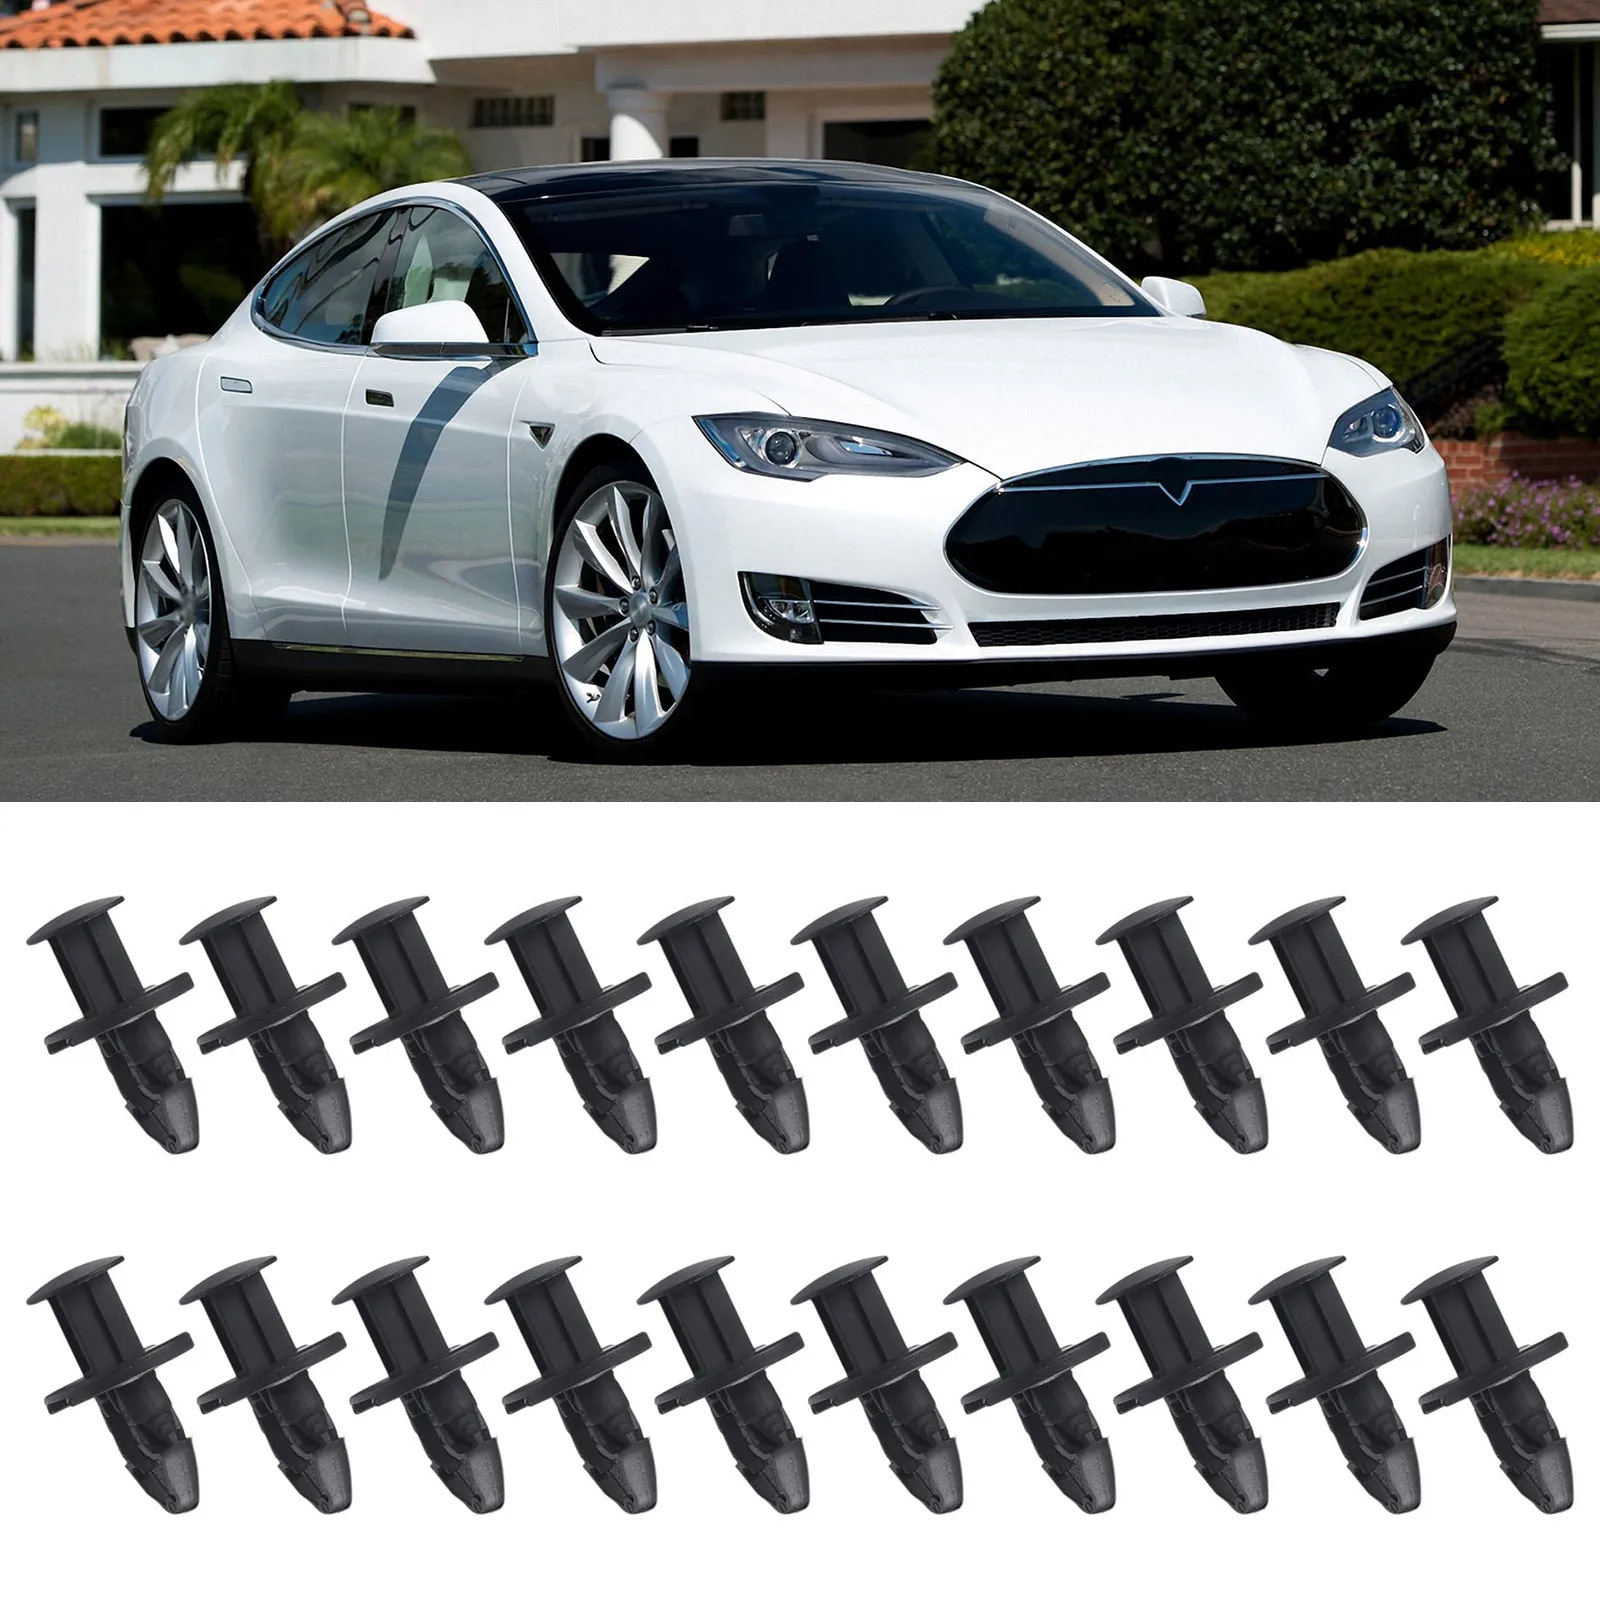 

Car Clips Undertray Rivets Car Accessories 1128034-00-B Black ABS FOR TESLA MODEL 3 2017 $ Up Fit Into 8mm Hole Push Pull